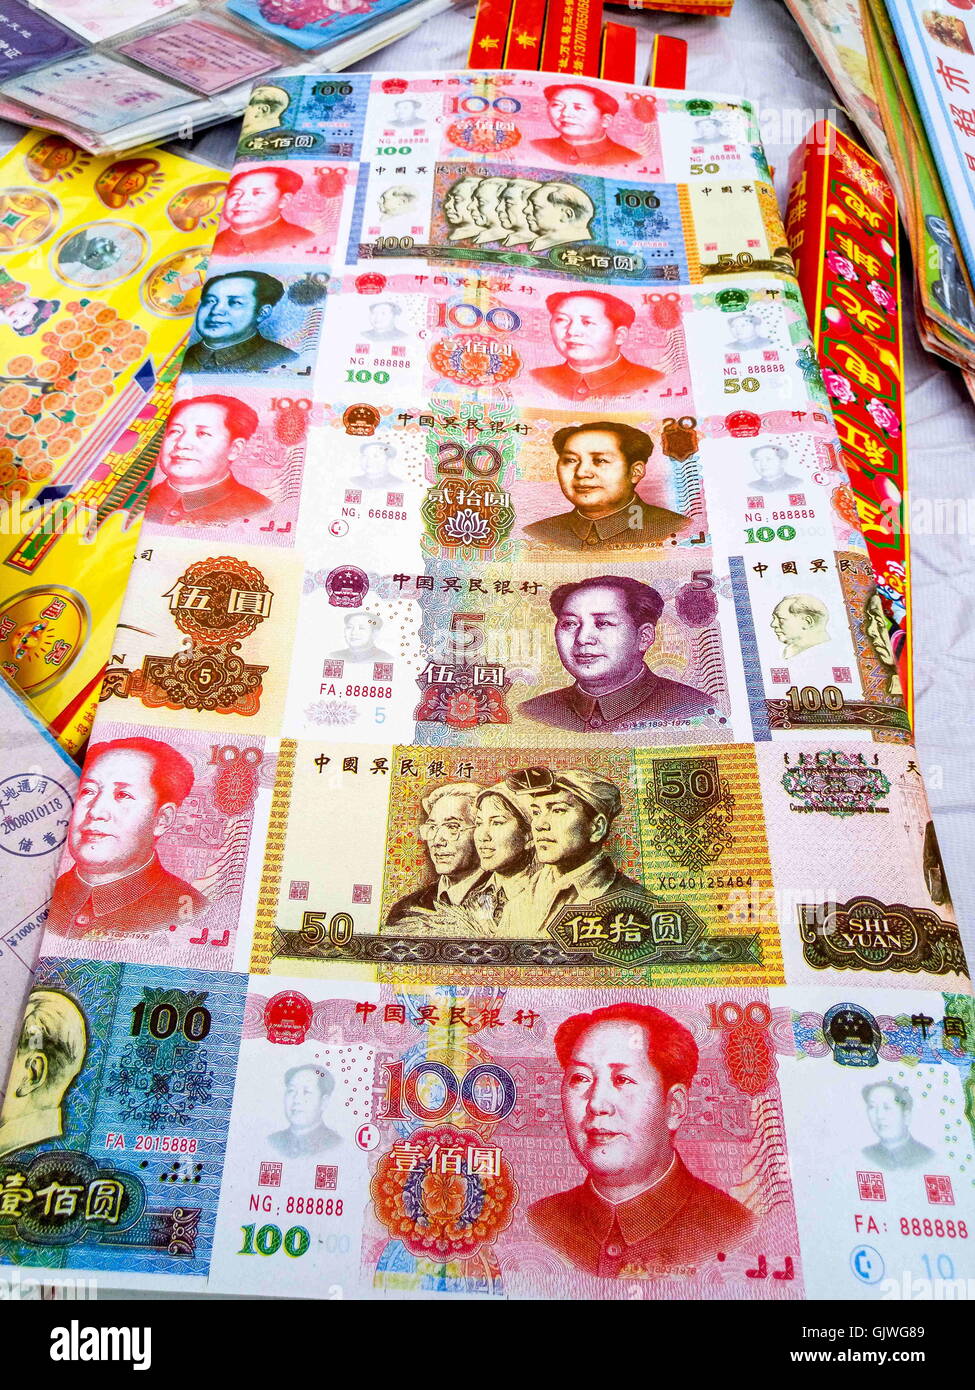 Anyang, Anyang, China. 17th Aug, 2016. Anyang, CHINA- August 16 2016: (EDITORIAL USE ONLY. CHINA OUT) False paper money at the market of offering. Various weird offerings including fake iPhones, villas, false paper money and cigarettes are on sale in Hua County, central ChinaÂ¡Â¯s Henan Province, before the traditional Zhongyuan Festival comes. Chinese traditional Zhongyuan Festival, also known as Ghost Festival, is celebrated on 15th day of the seventh lunar month. People usually burn incense and paper money as an offering to the spirits of deceased ancestors during the festival. (Credit I Stock Photo